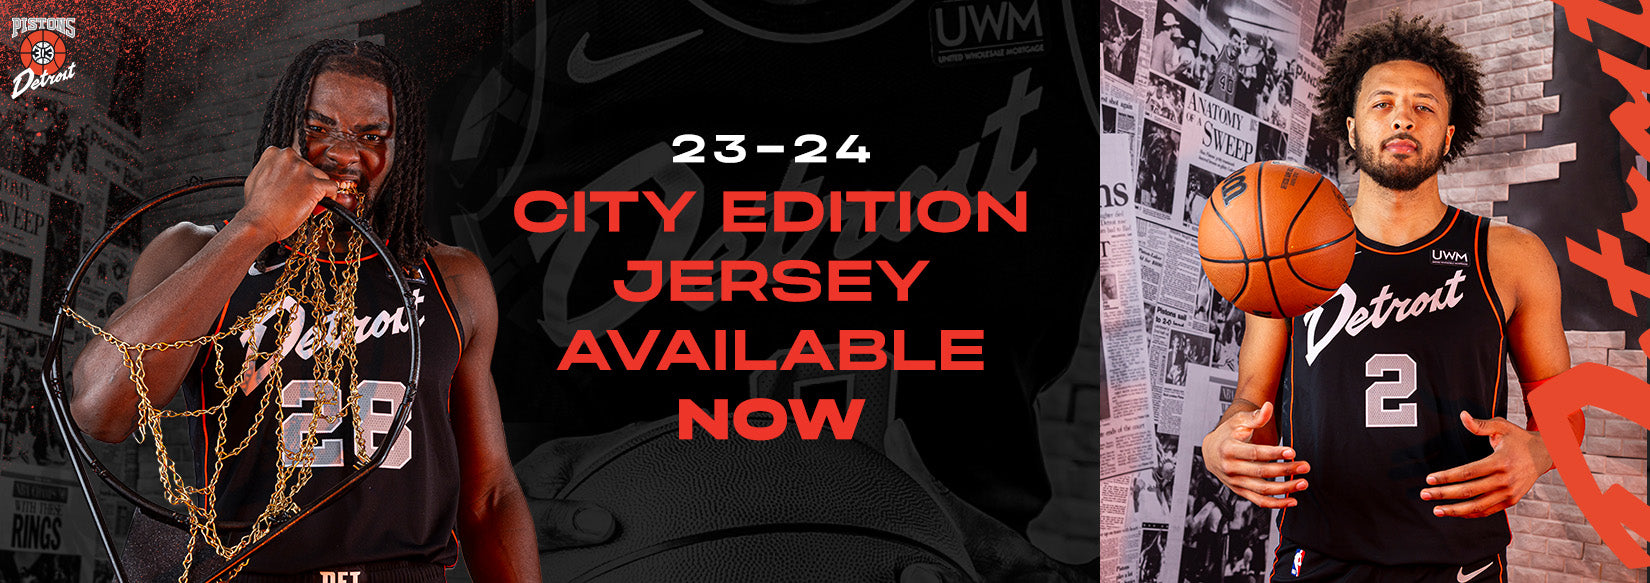 2023-24 City Edition Jerseys now available